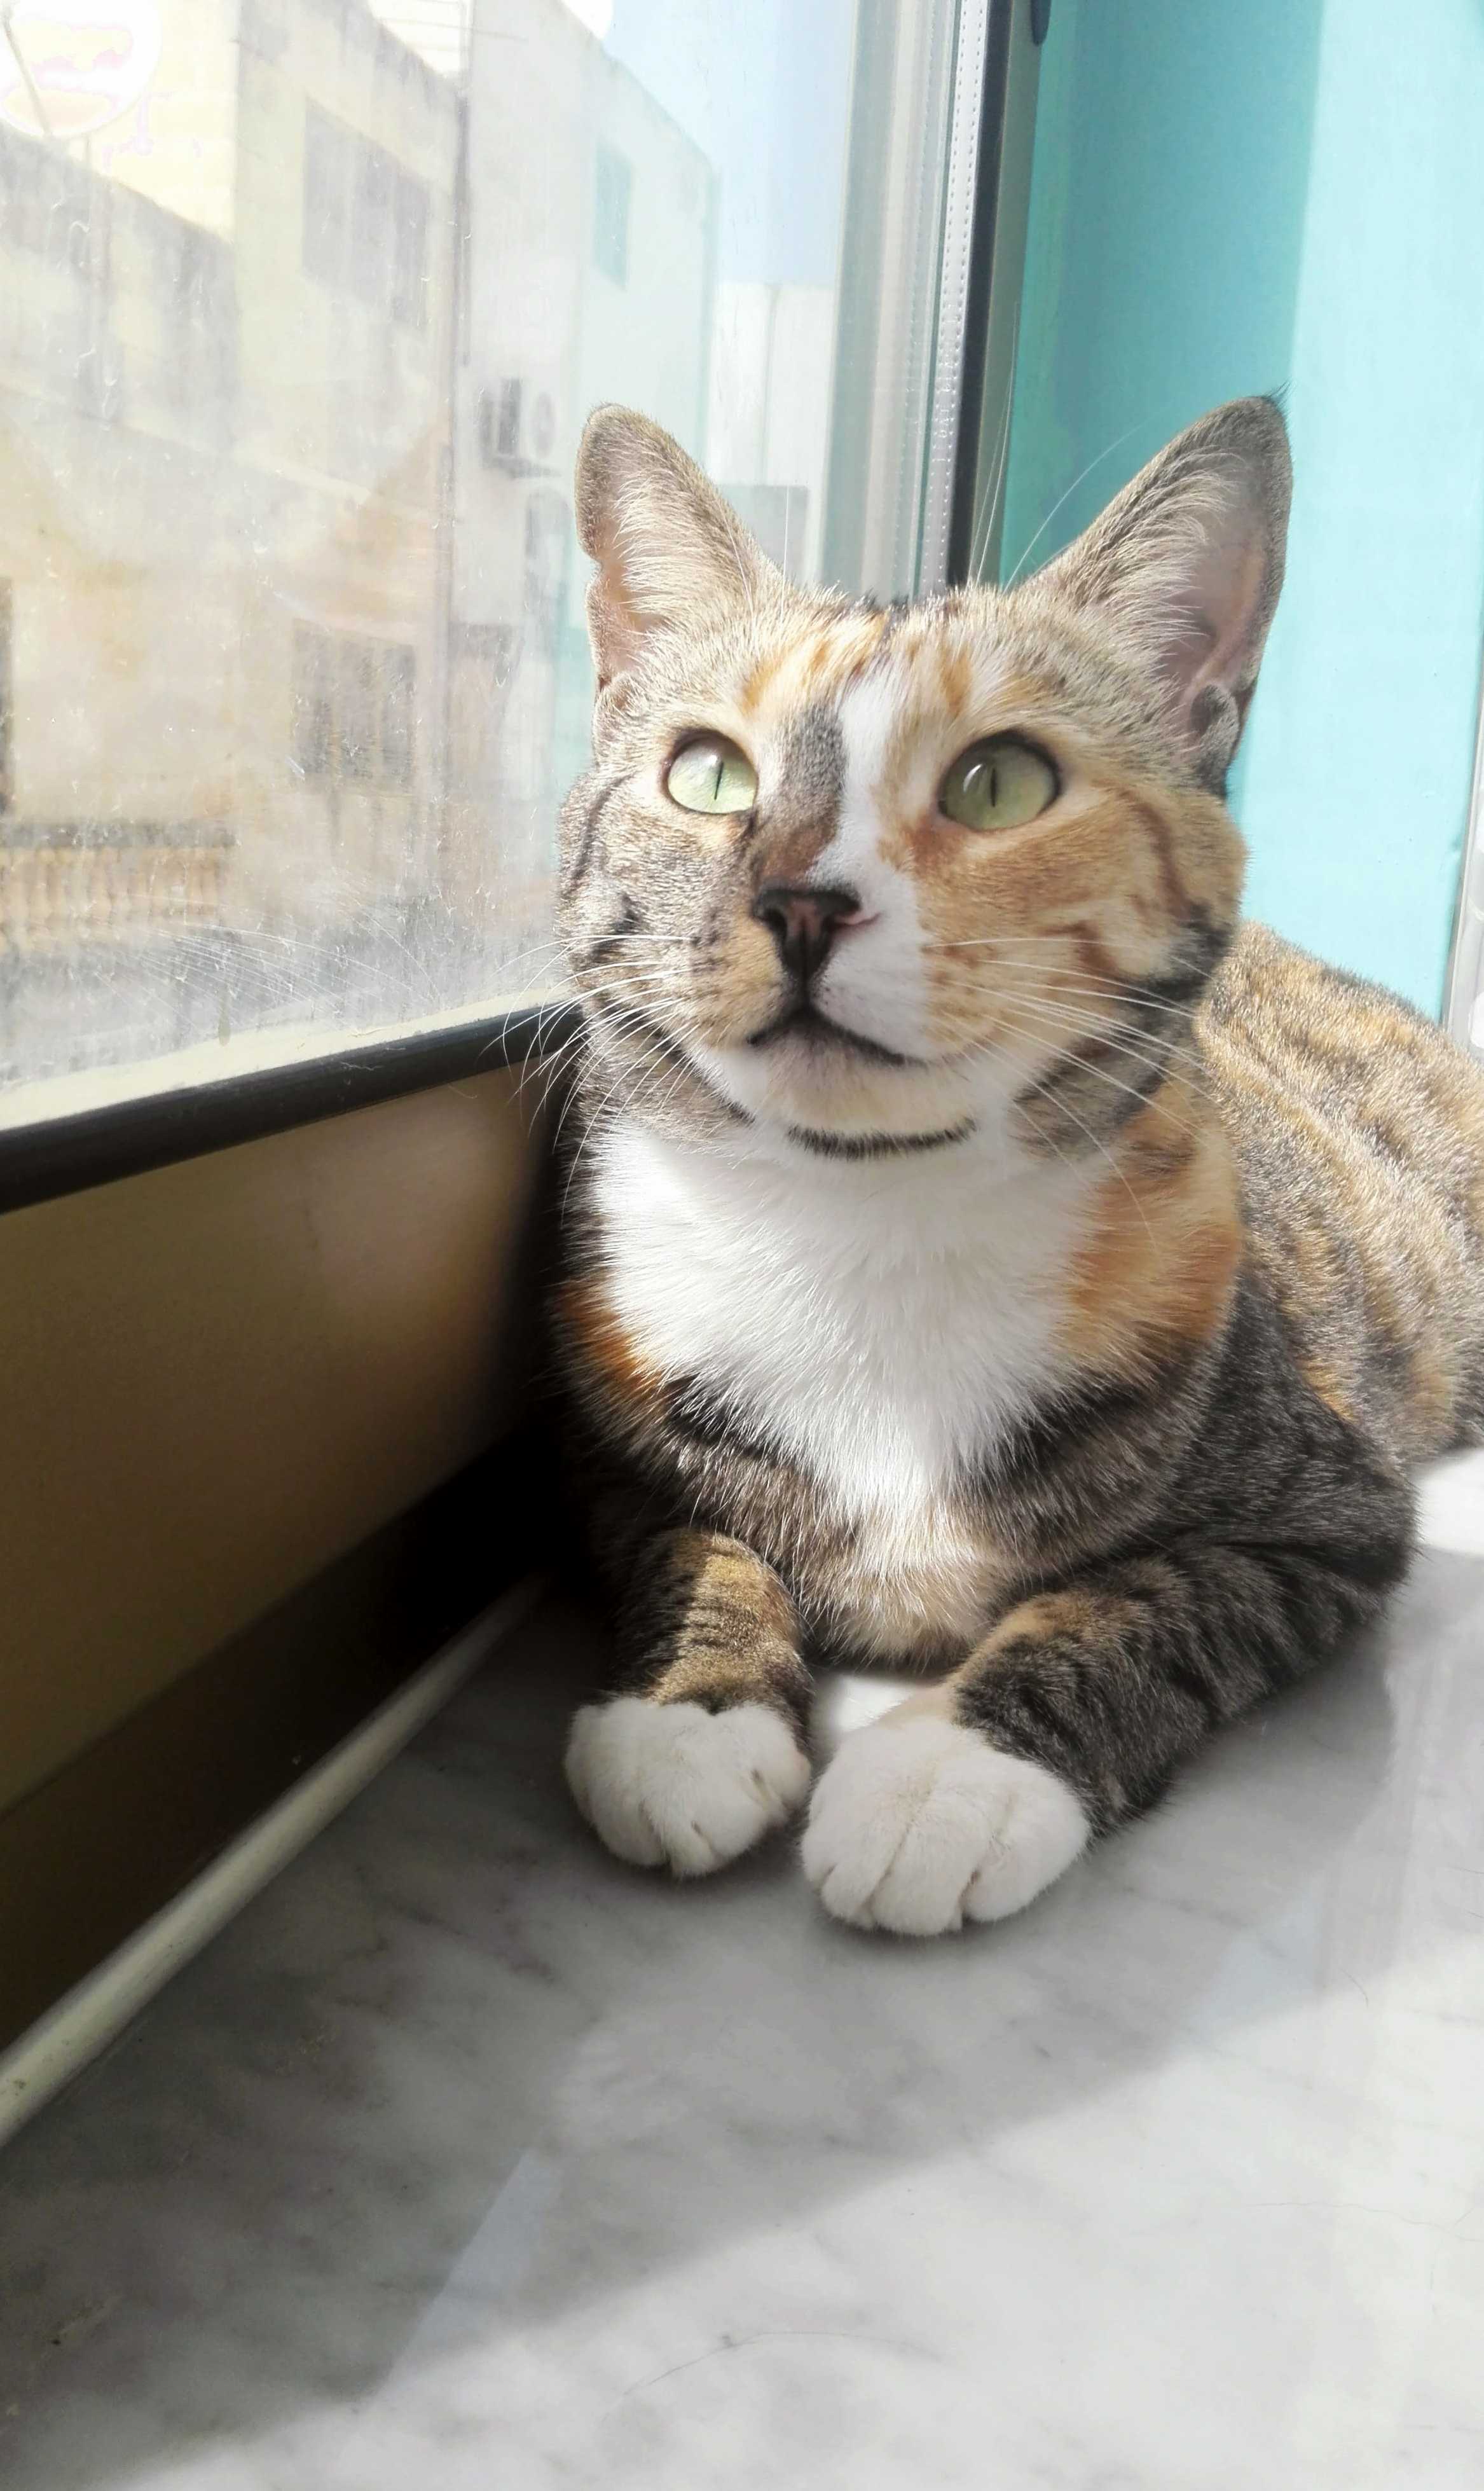 There are wider (and better) windowsills in the house, but this is the one she likes most. reddit, meet maya!